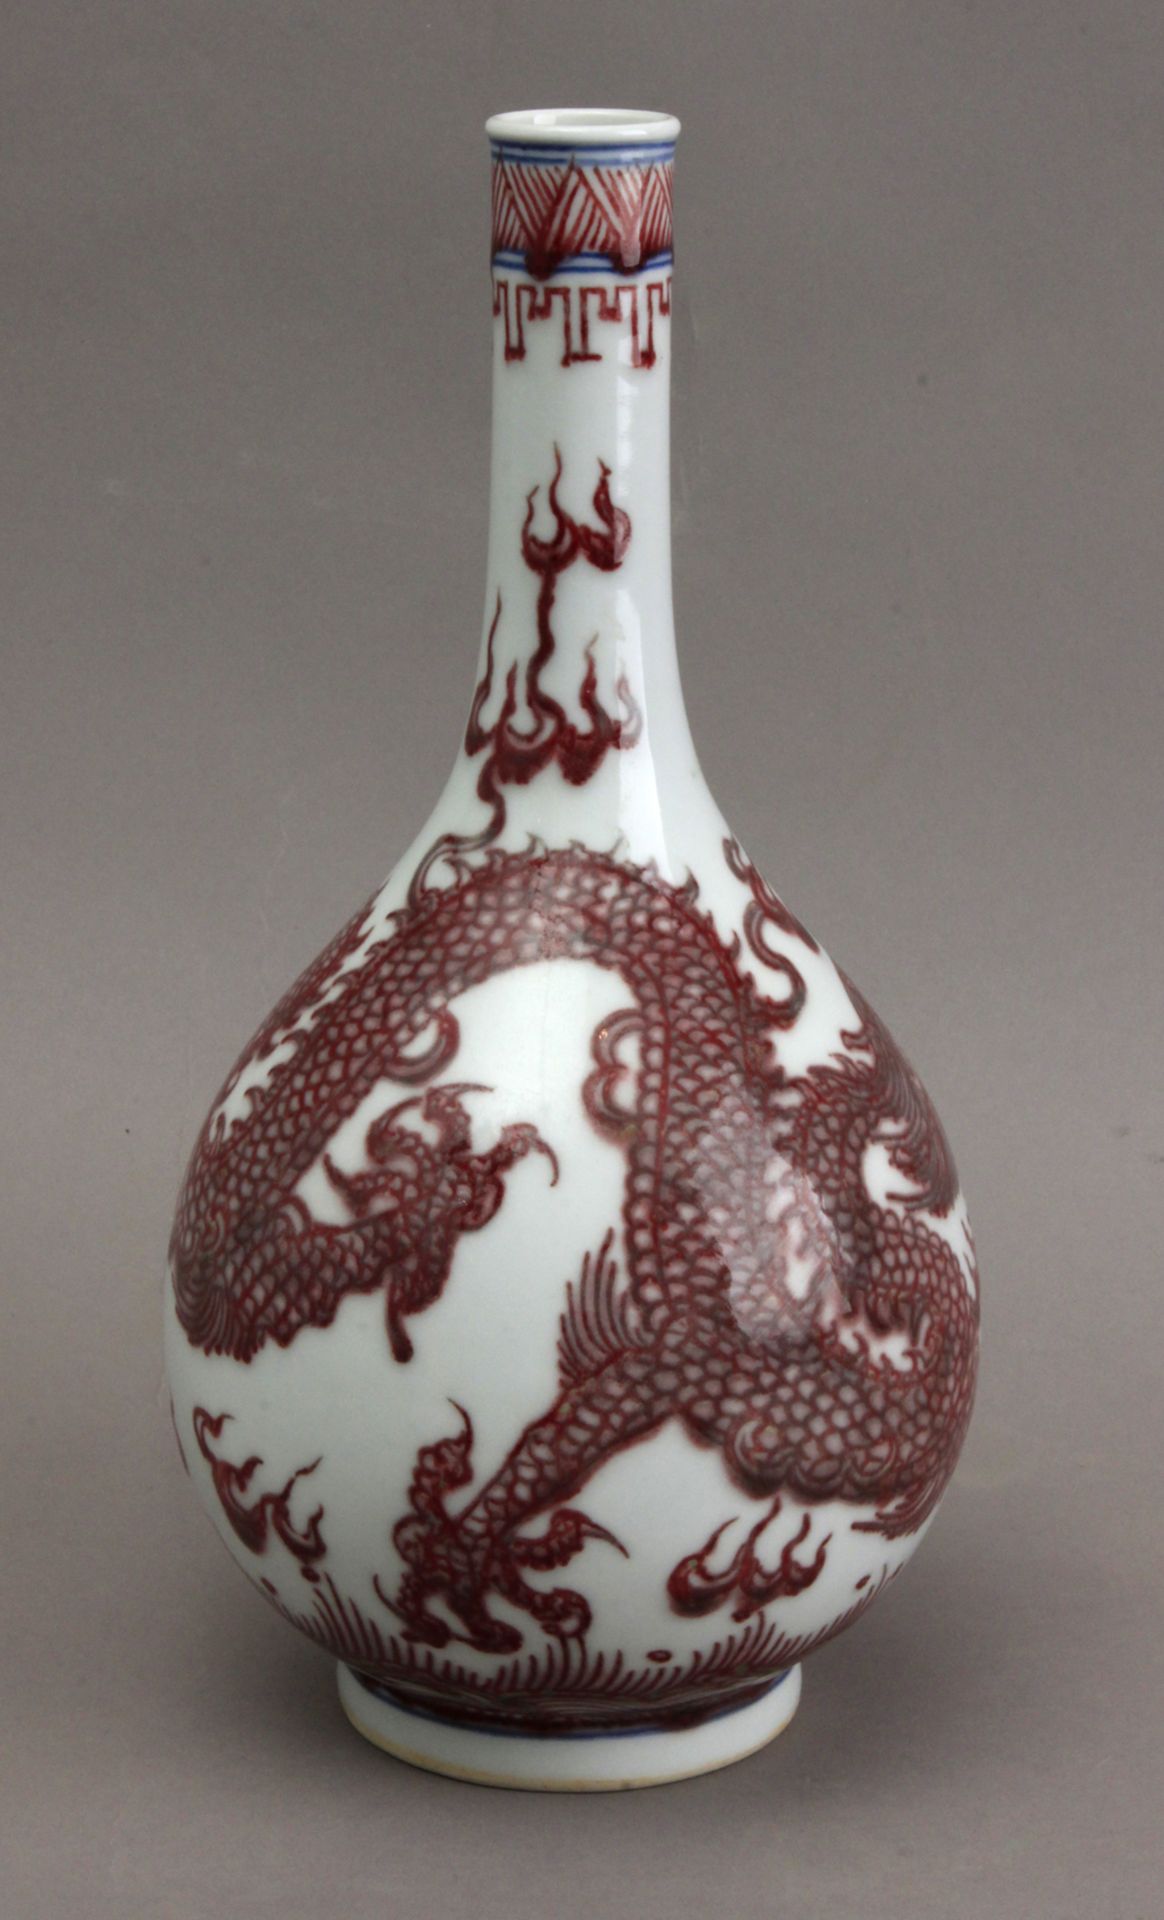 A 20th century Chinese porcelain vase